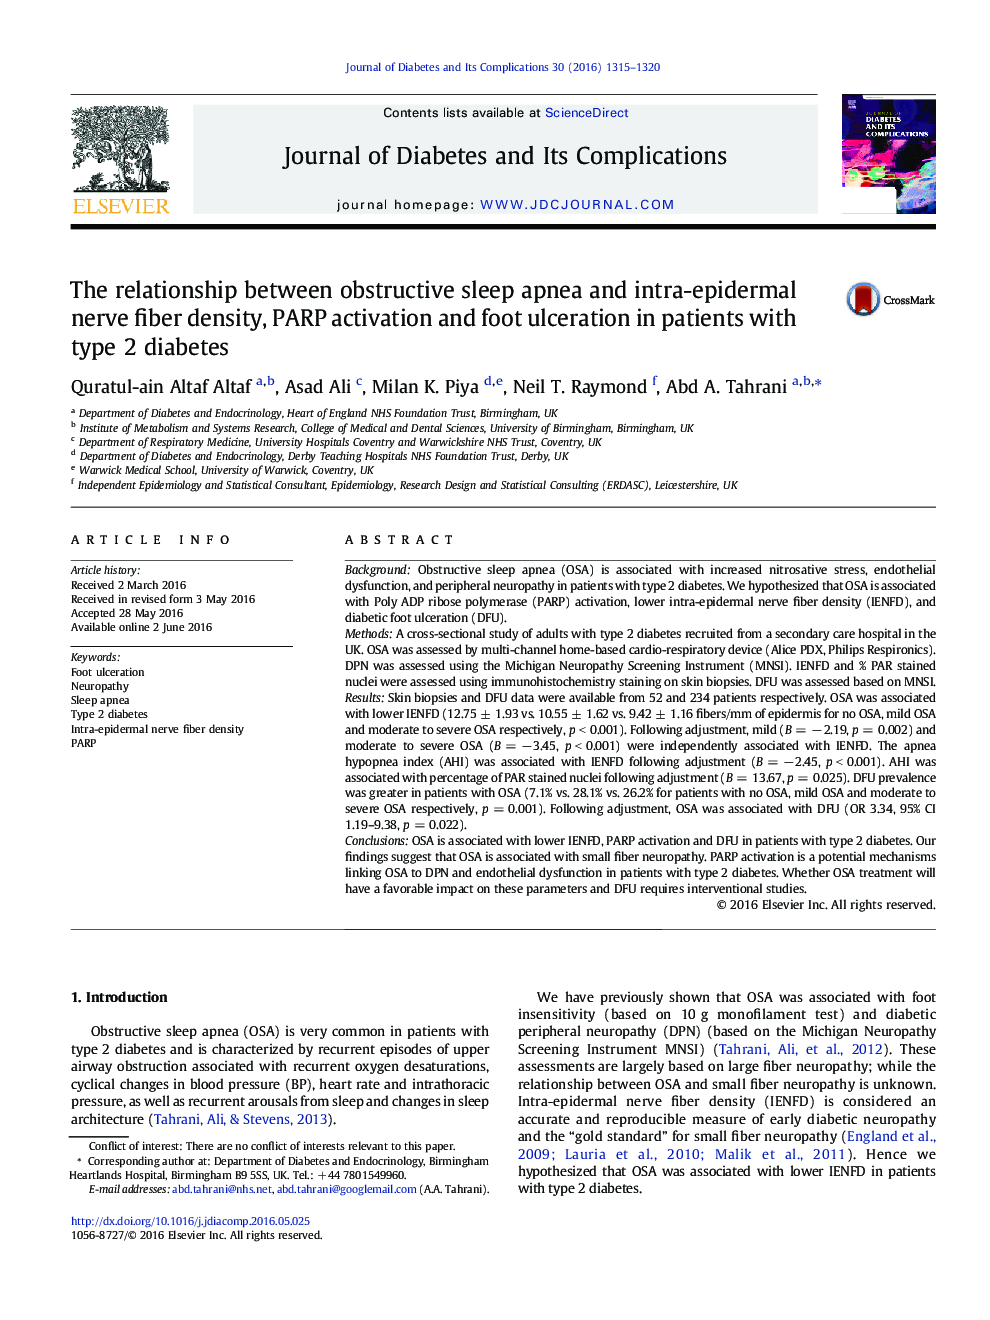 The relationship between obstructive sleep apnea and intra-epidermal nerve fiber density, PARP activation and foot ulceration in patients with type 2 diabetes